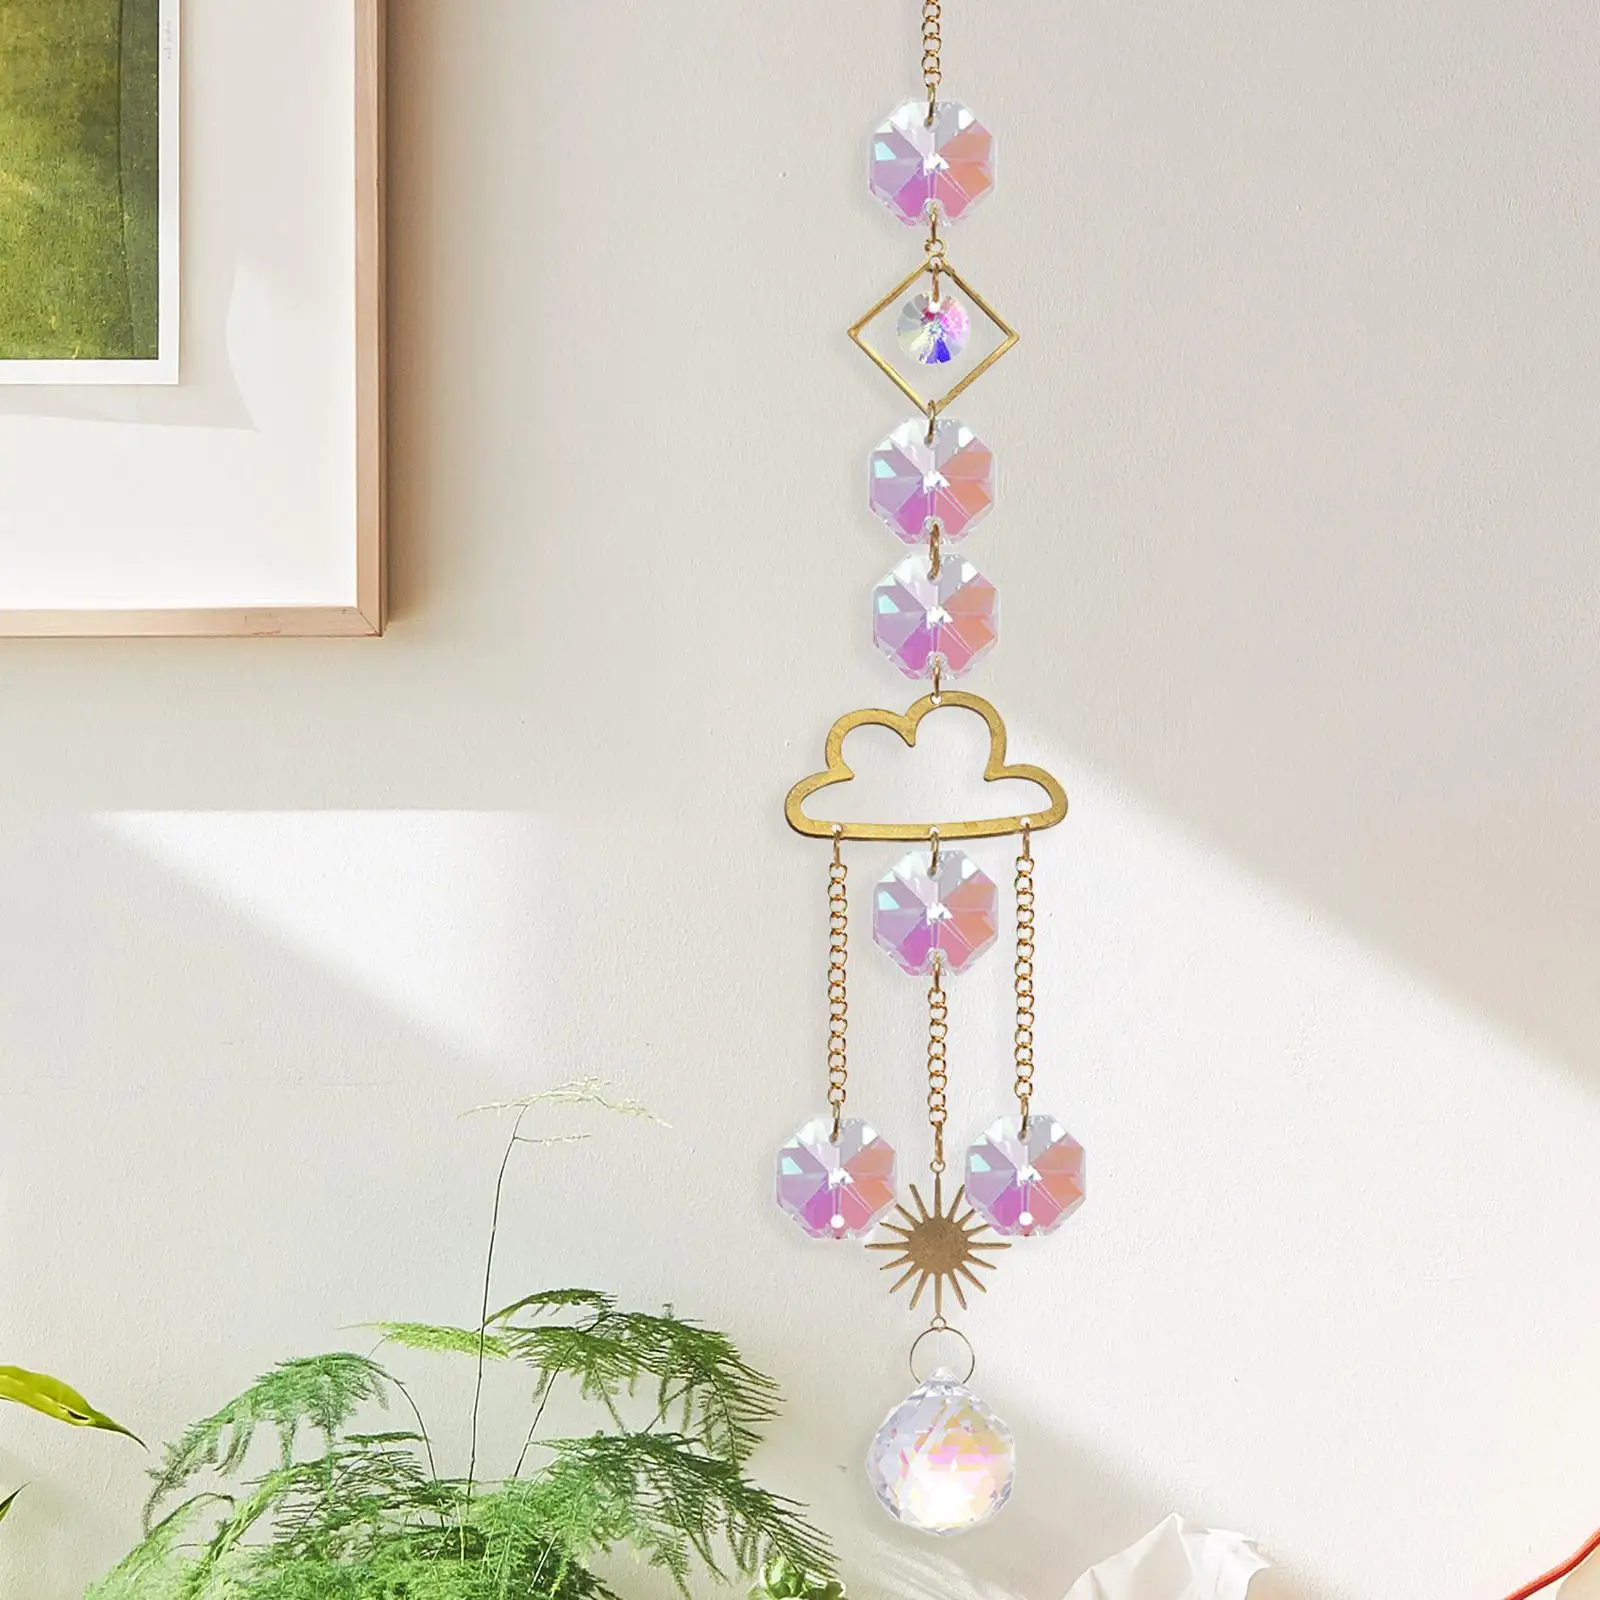 Hanging  Decor Ornaments ation Gifts Gold Pendant for Garden Windows Courtyard Office Indoor Outdoor